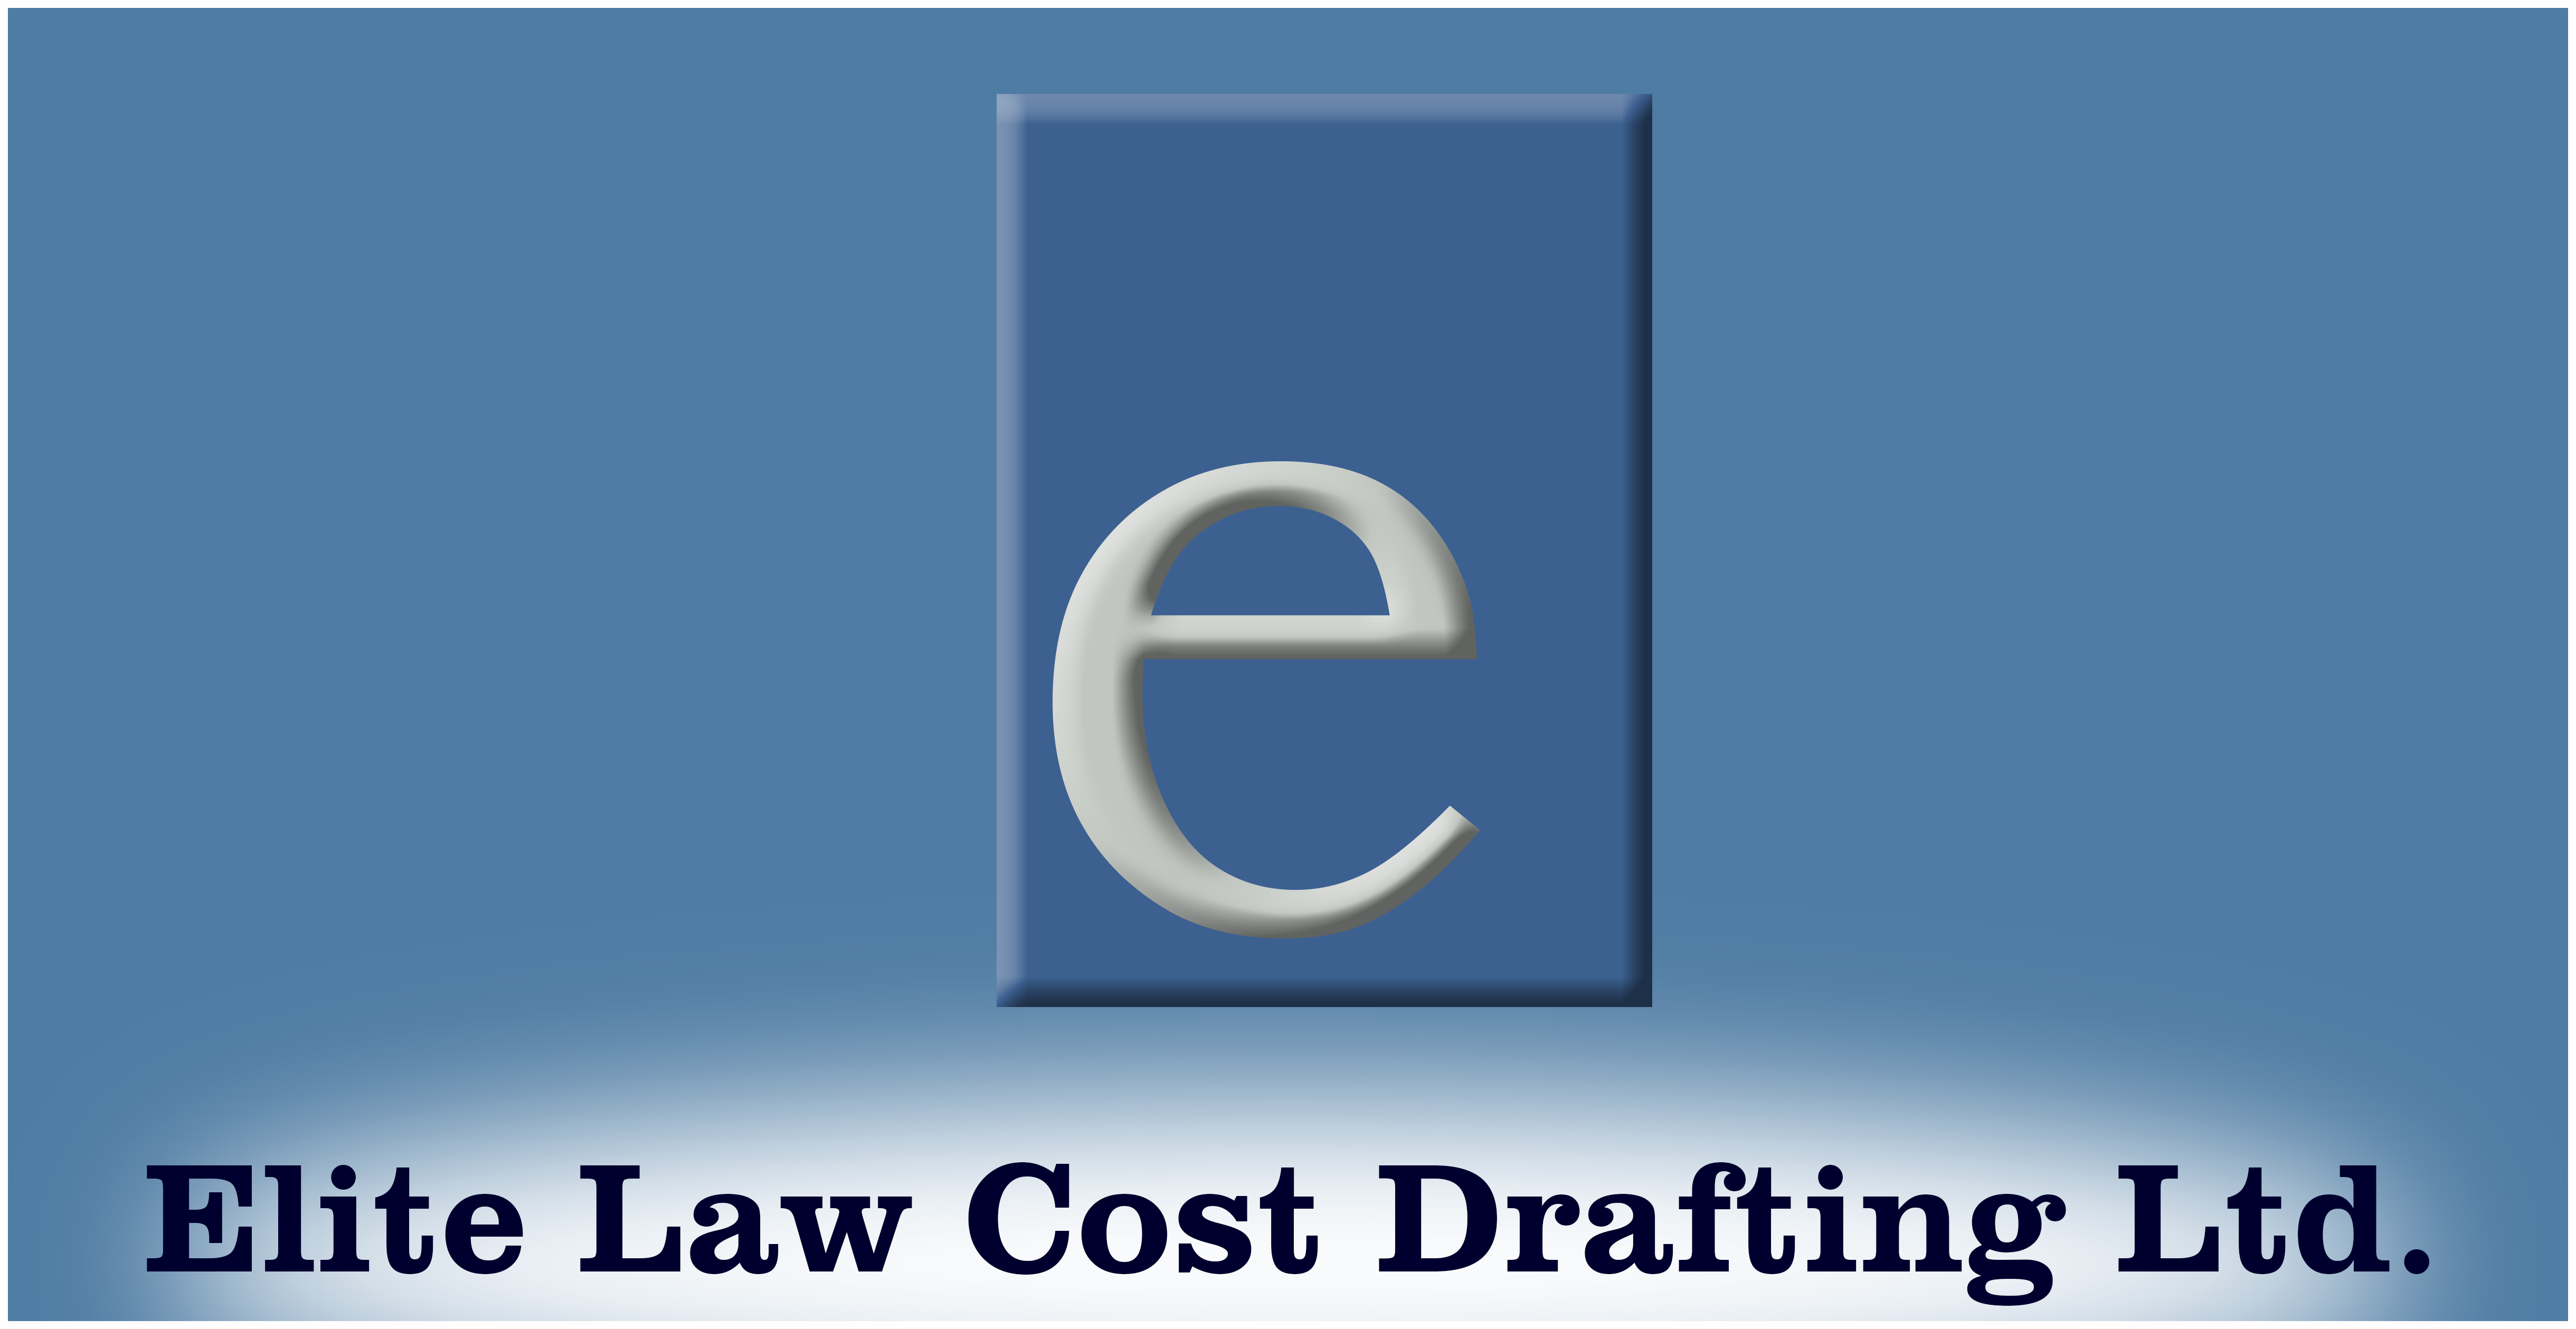 Elite Law Costs Drafting